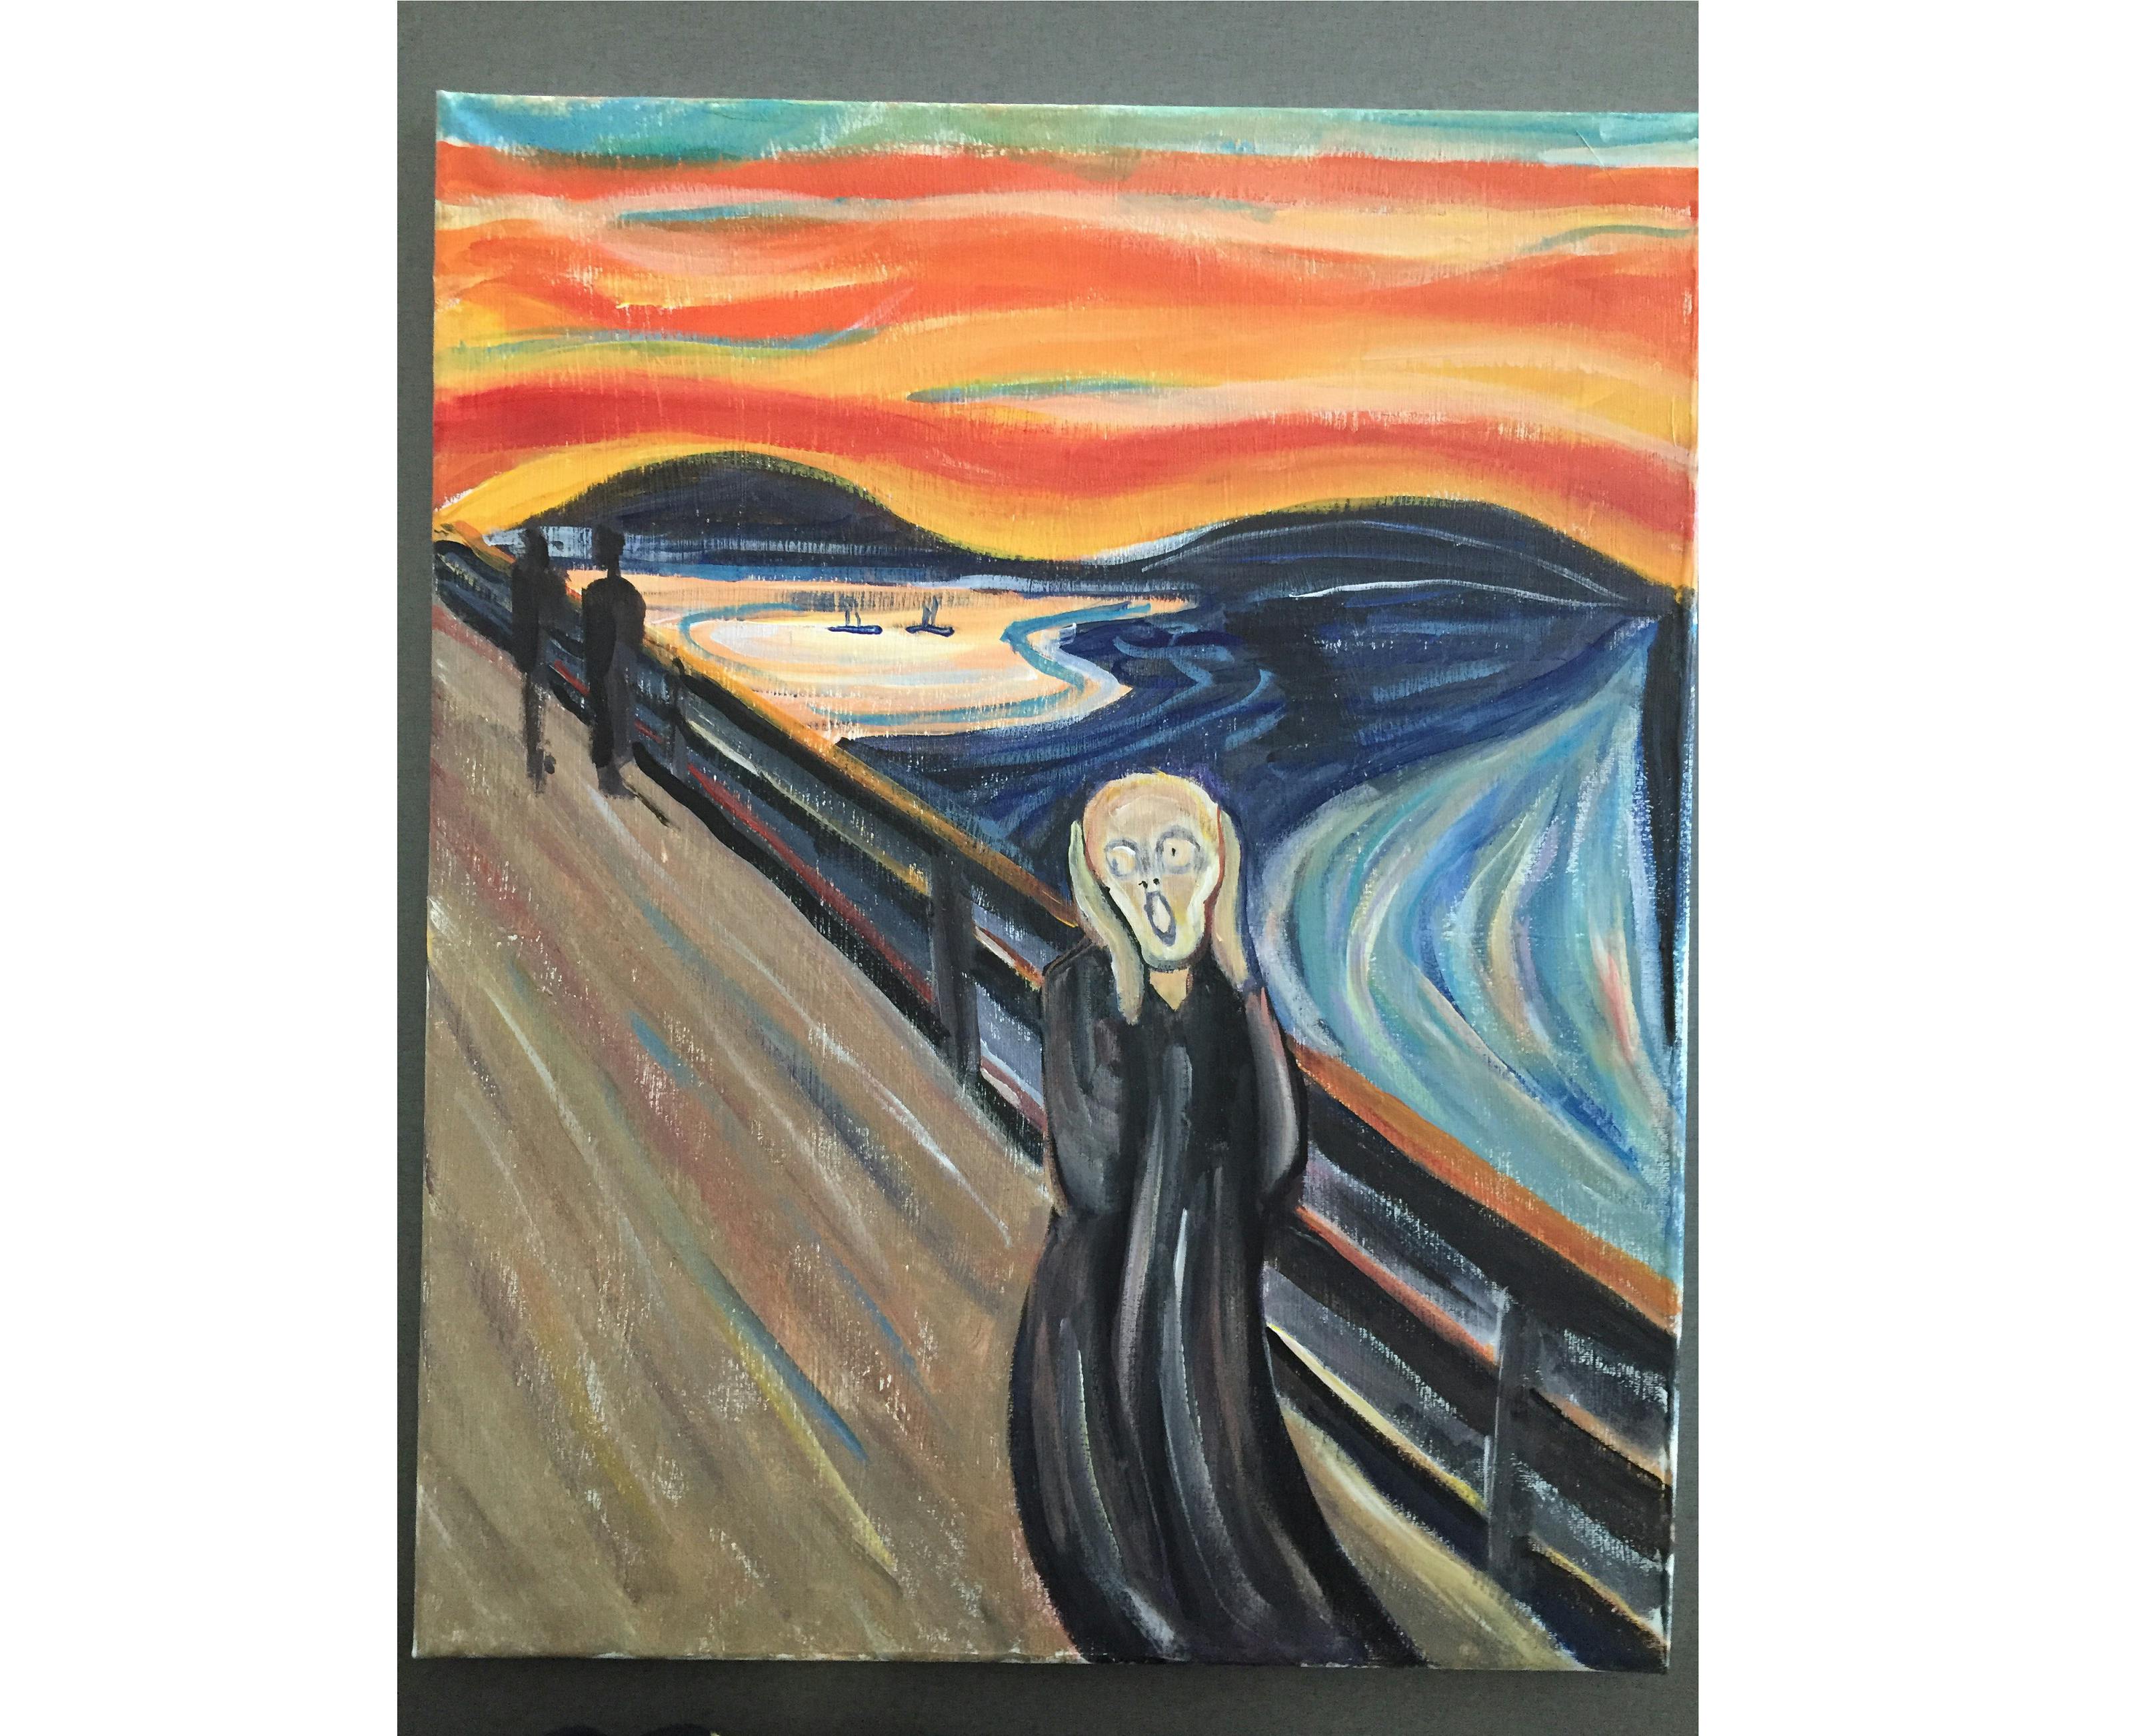 The Scream by Edvard Munch Paint & Sip Night - Art Painting, Drink & Food